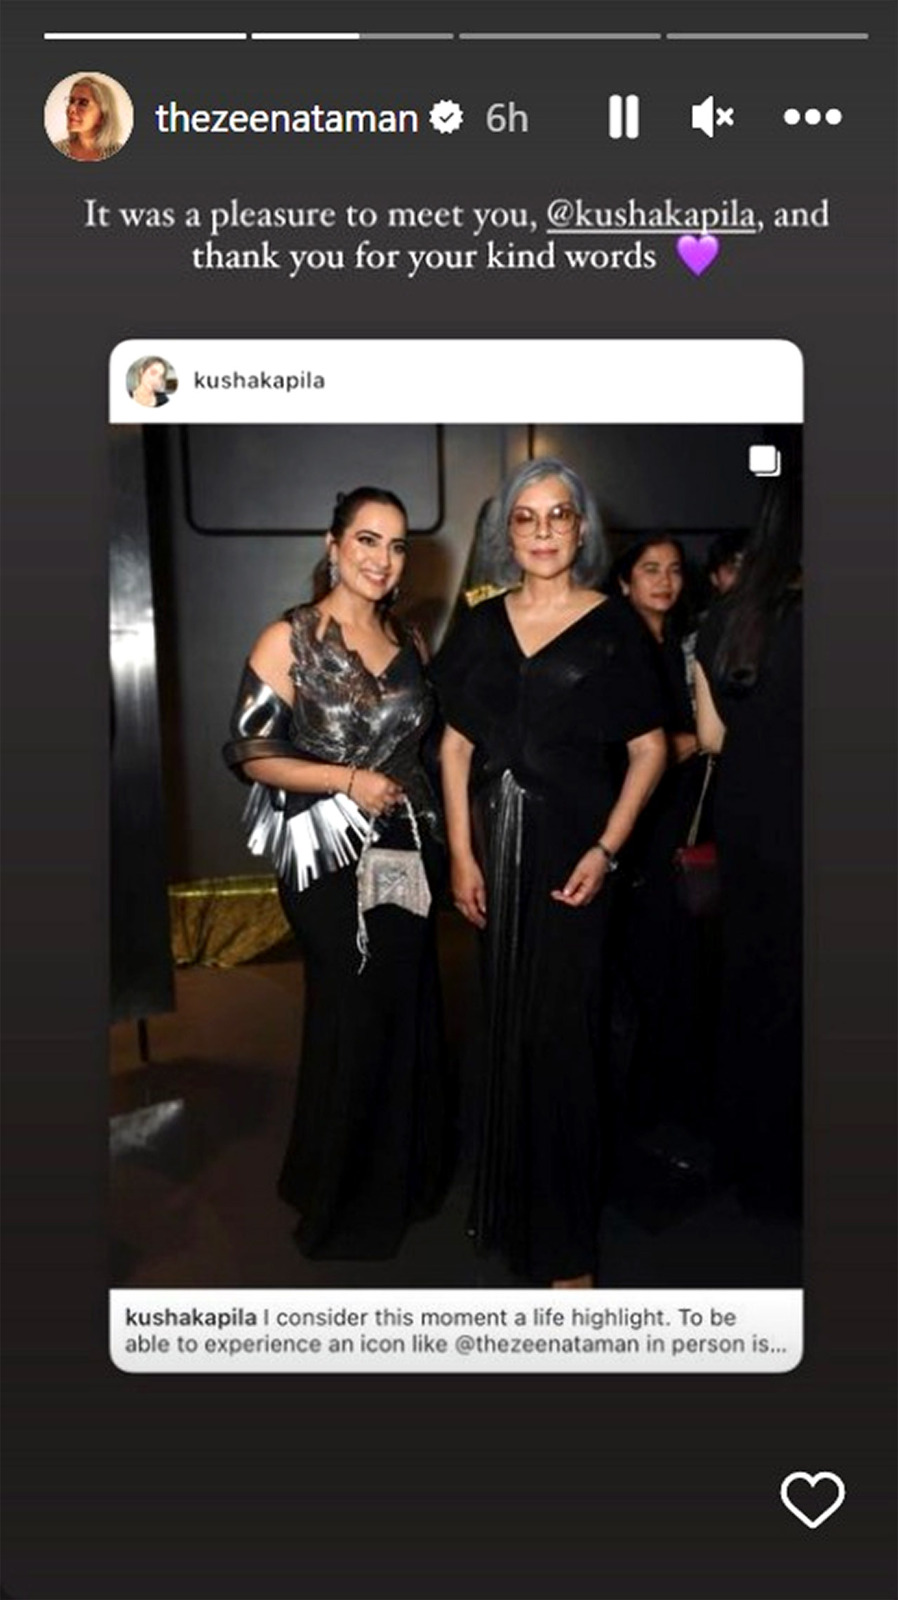 Zeenat Aman reacts to influencer Kusha Kapila's rave review after meeting at Amit Aggarwal's fashion event